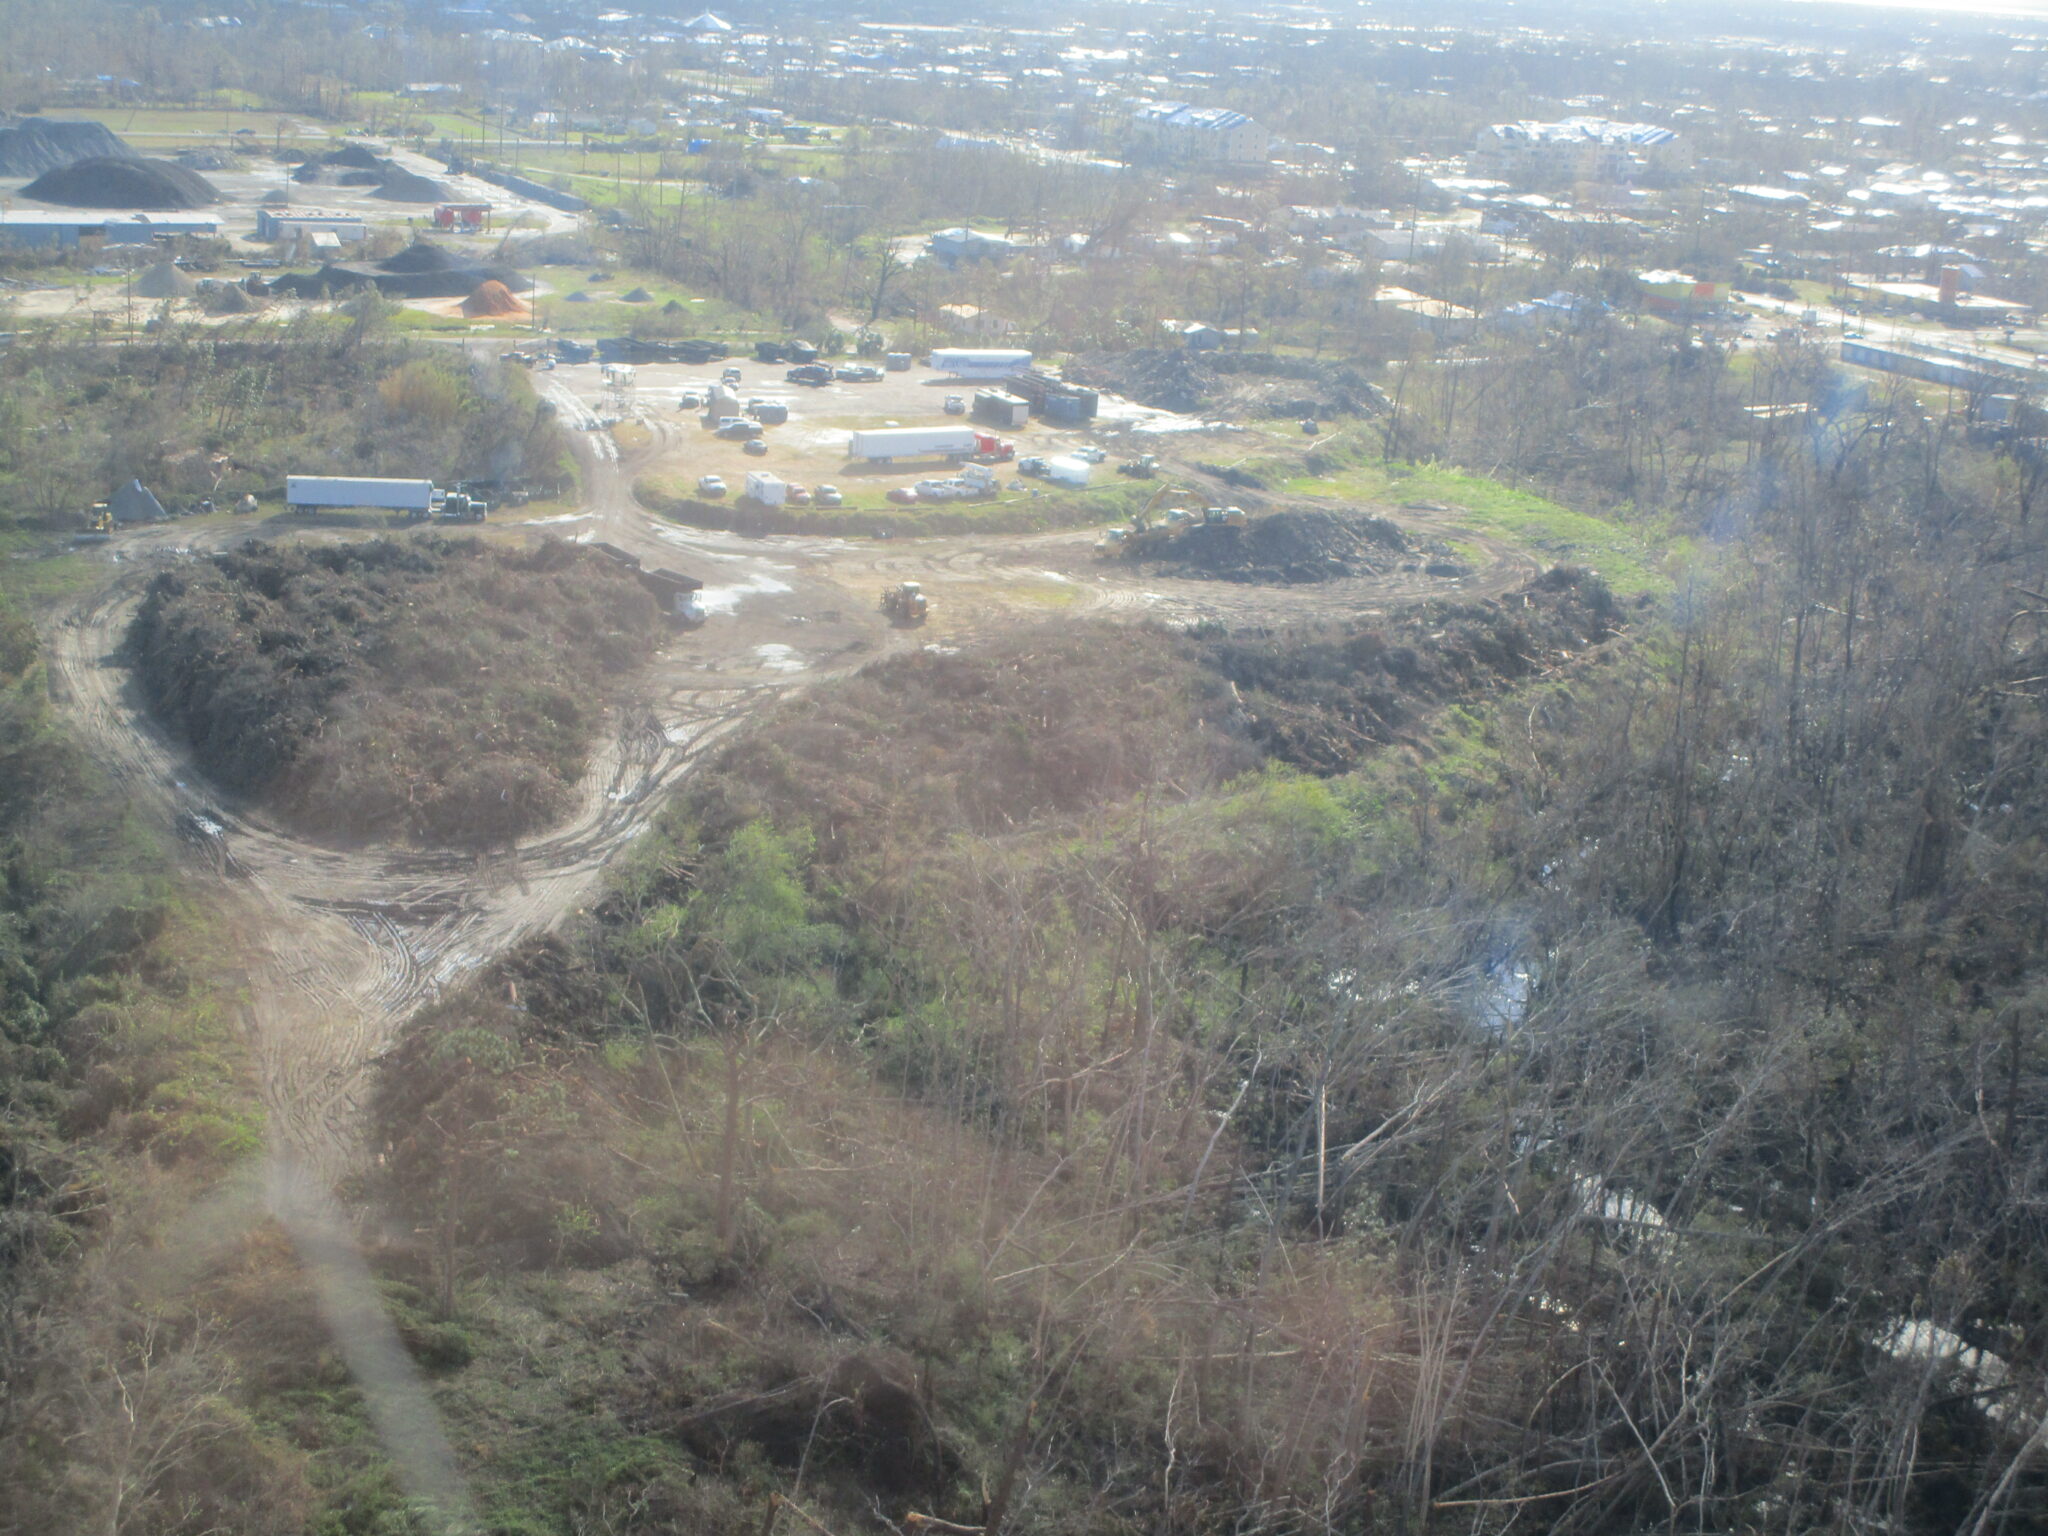 Overview of the piles of brush awaiting to be ground.